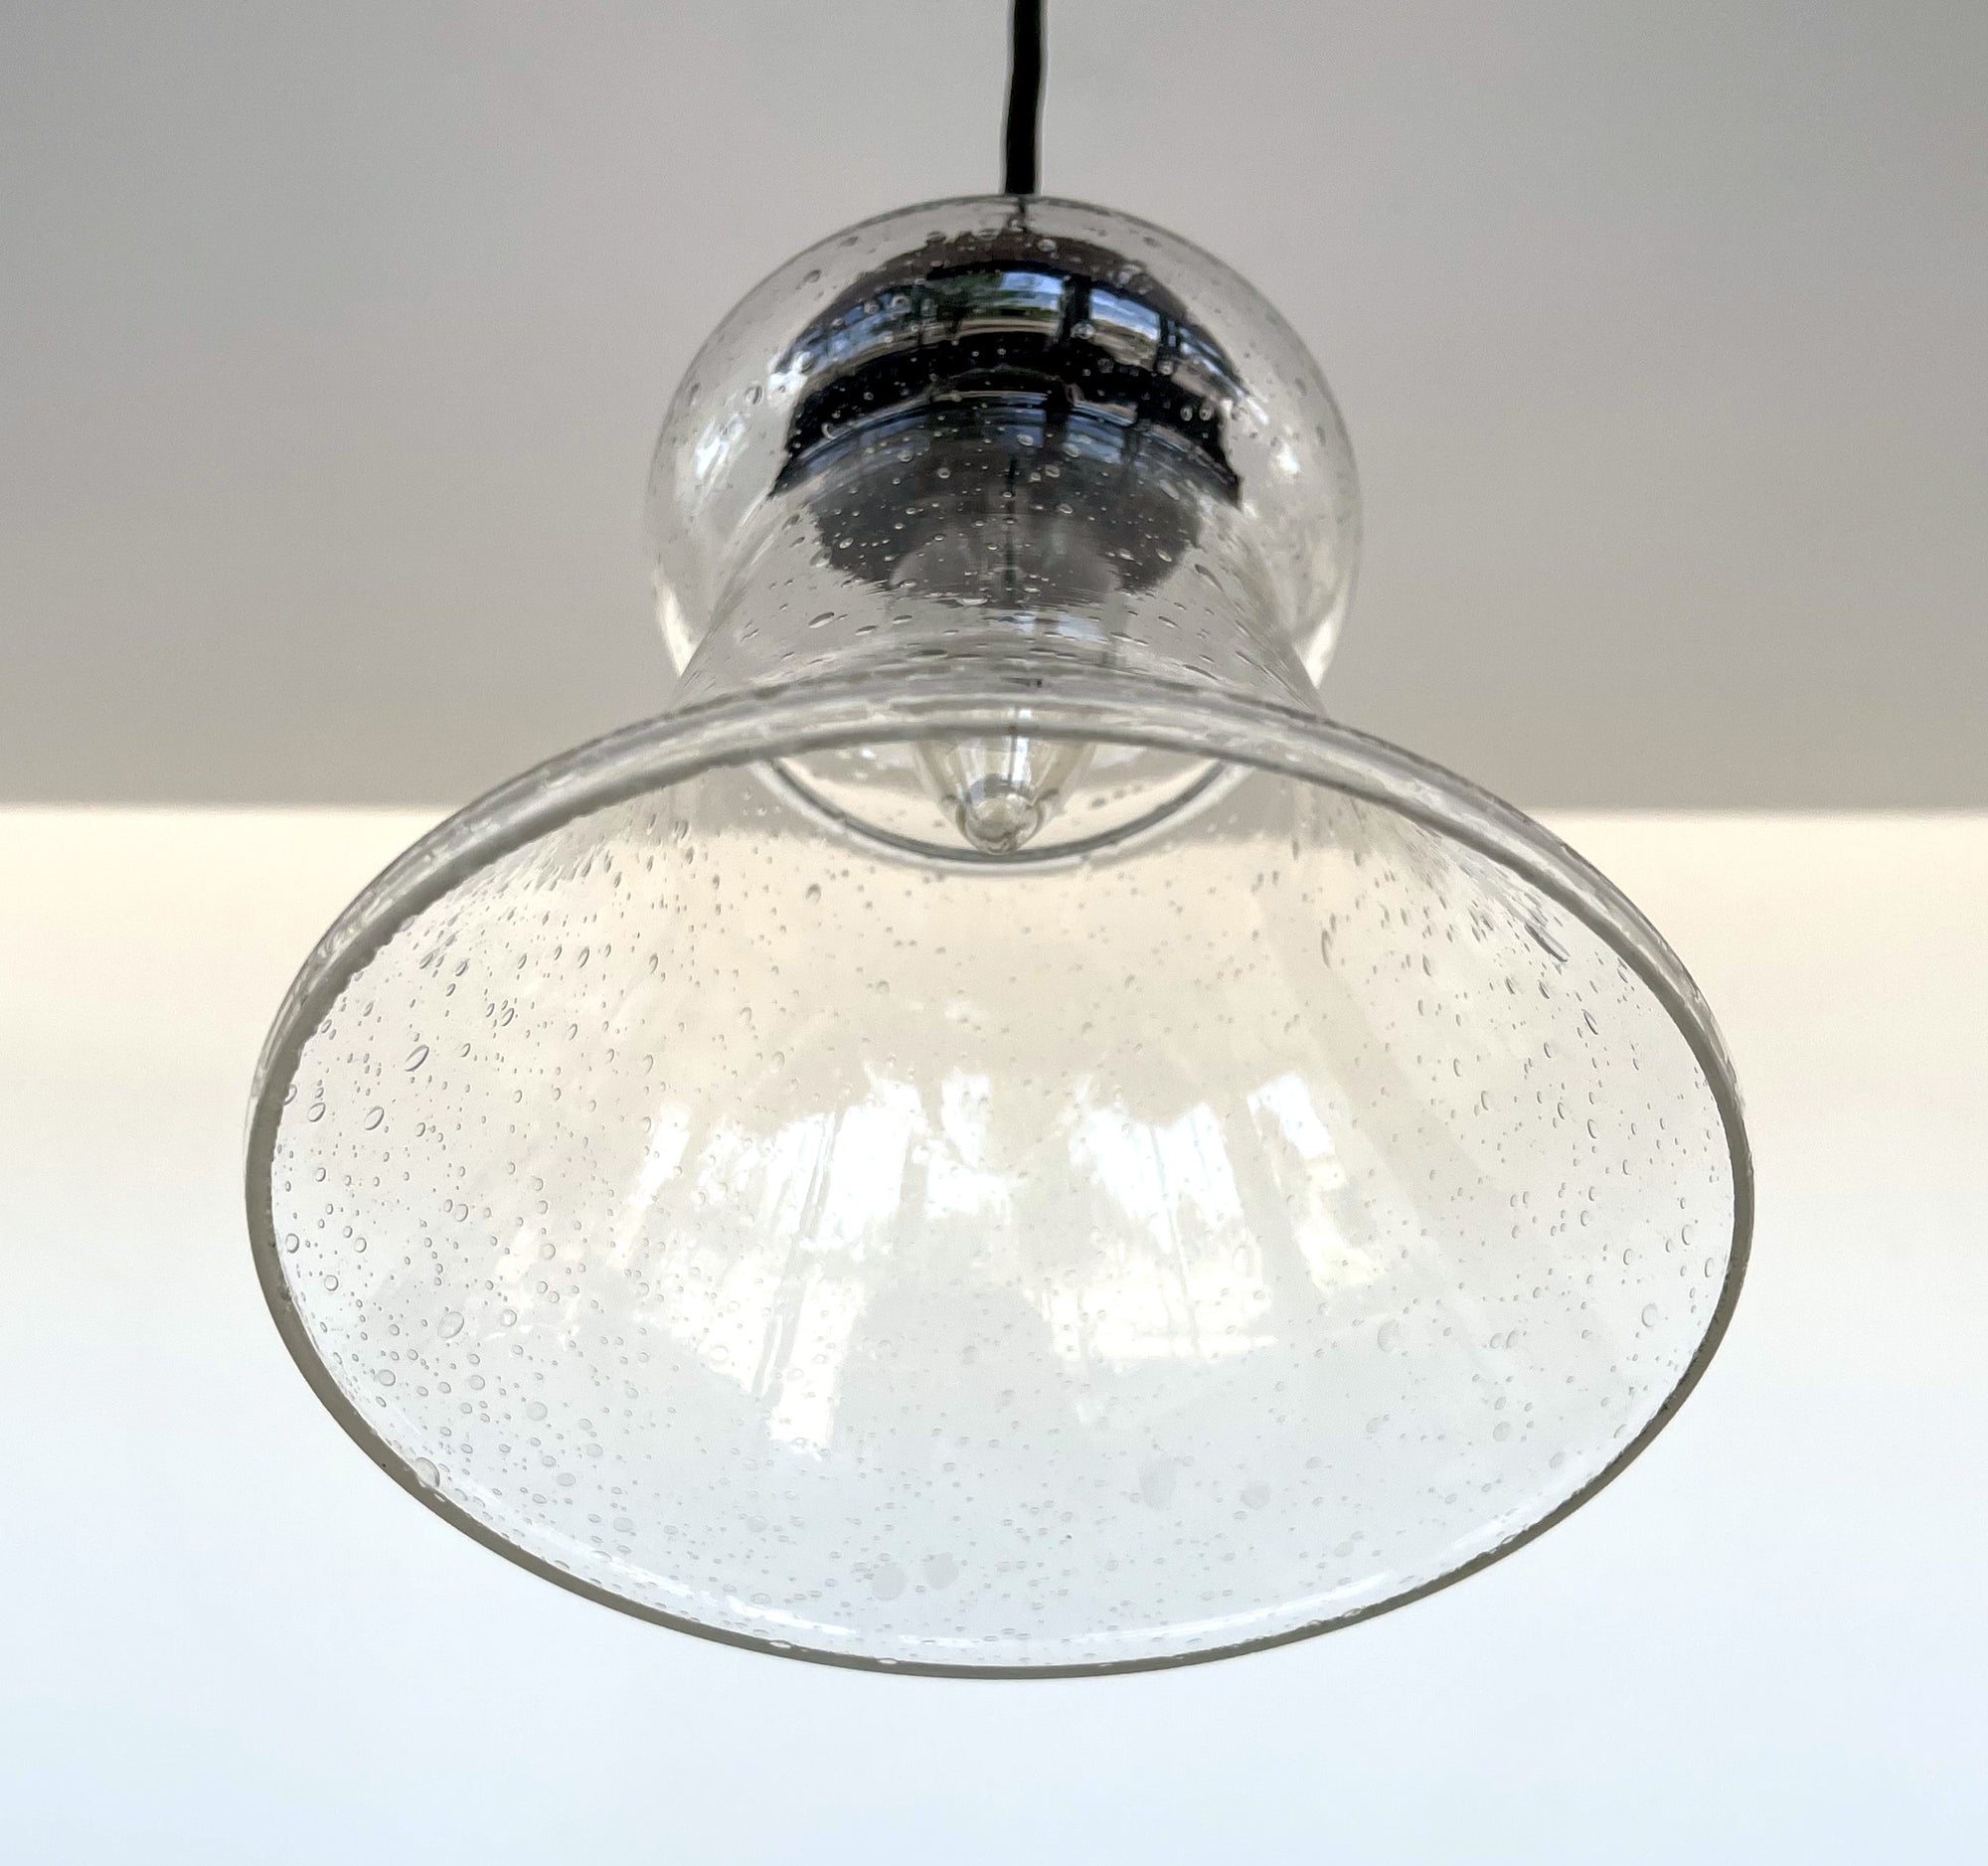 Antique Seeded Clear Glass Pendant Light